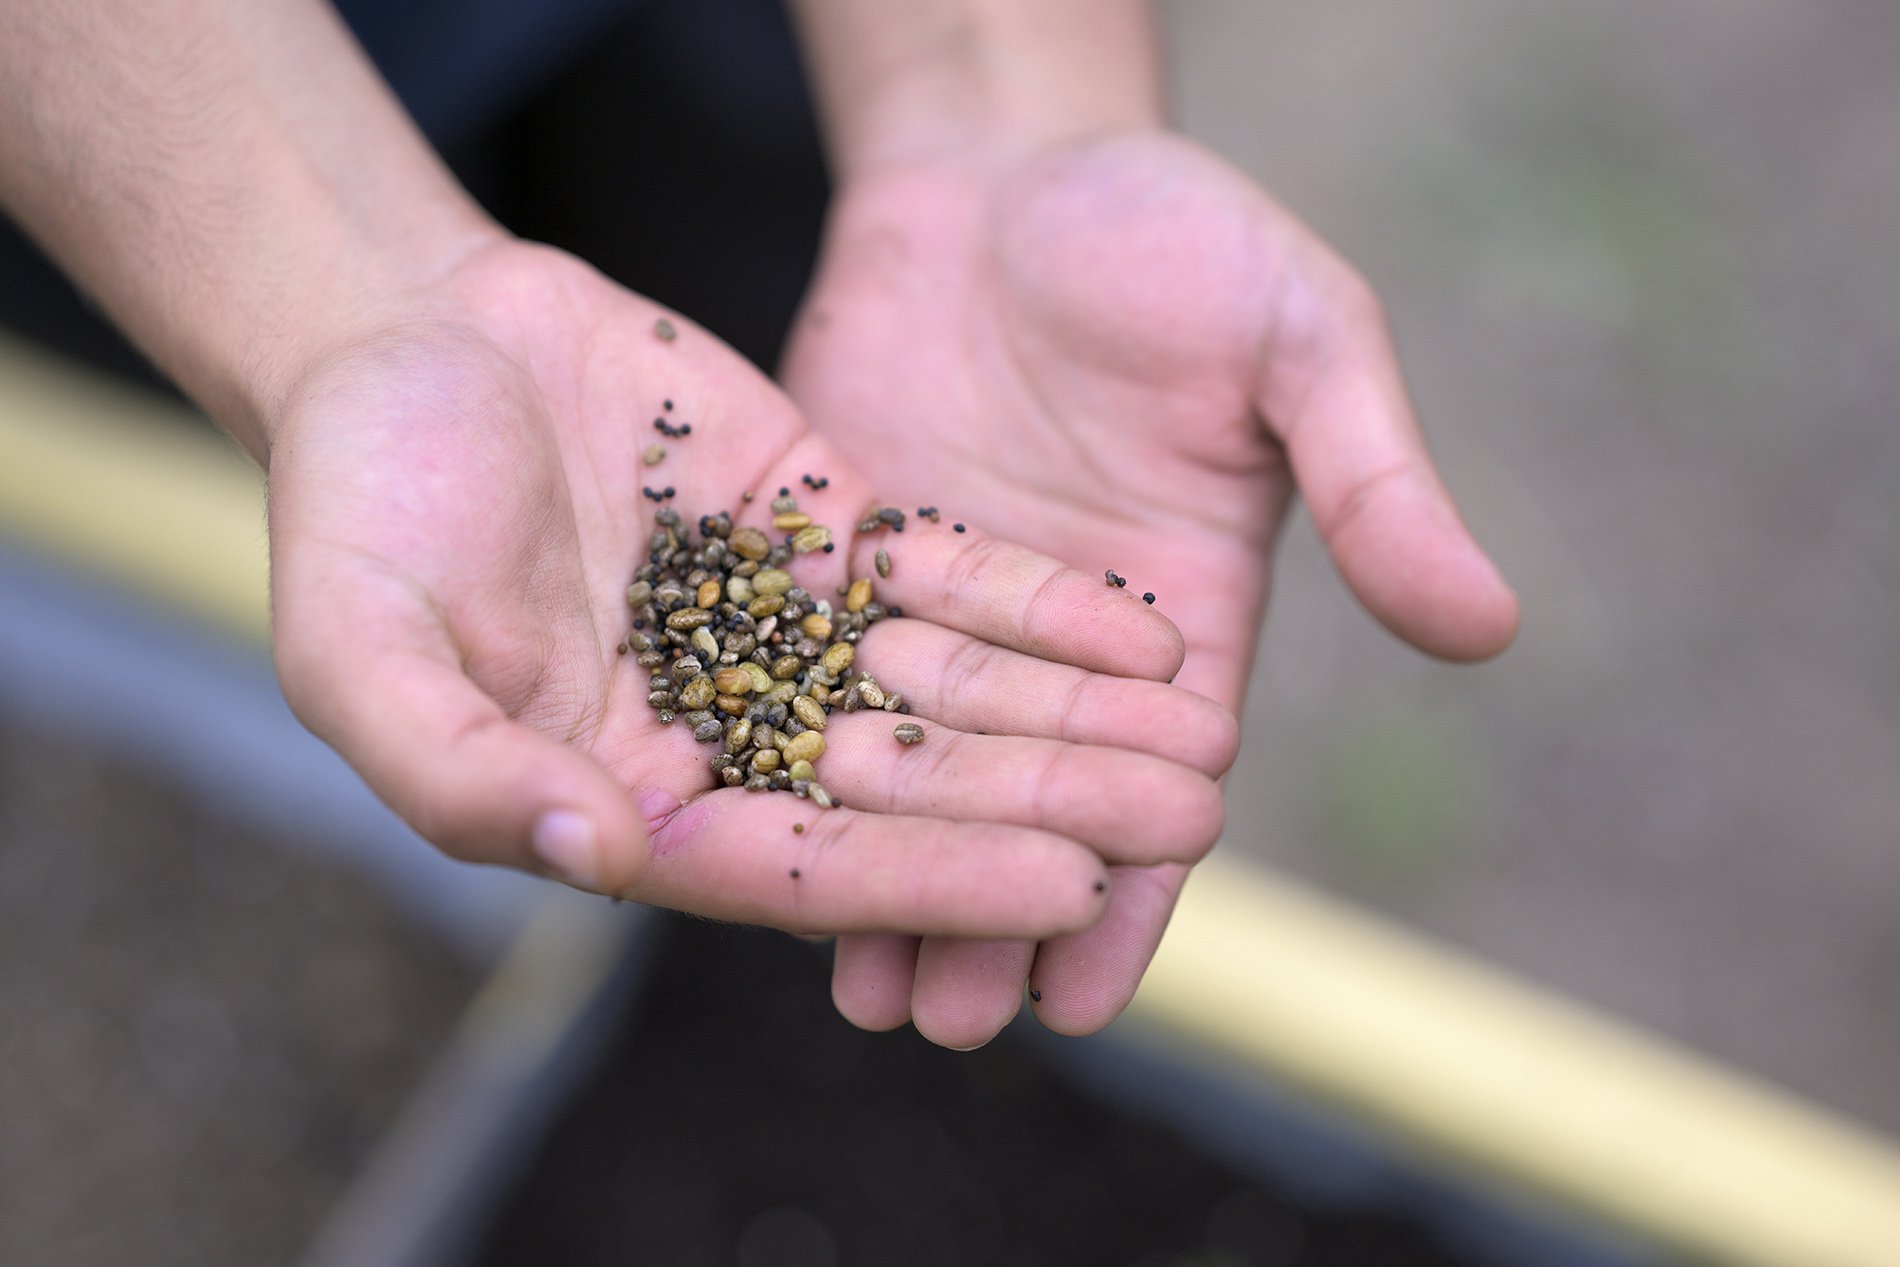 A student holds out hands full of seeds.